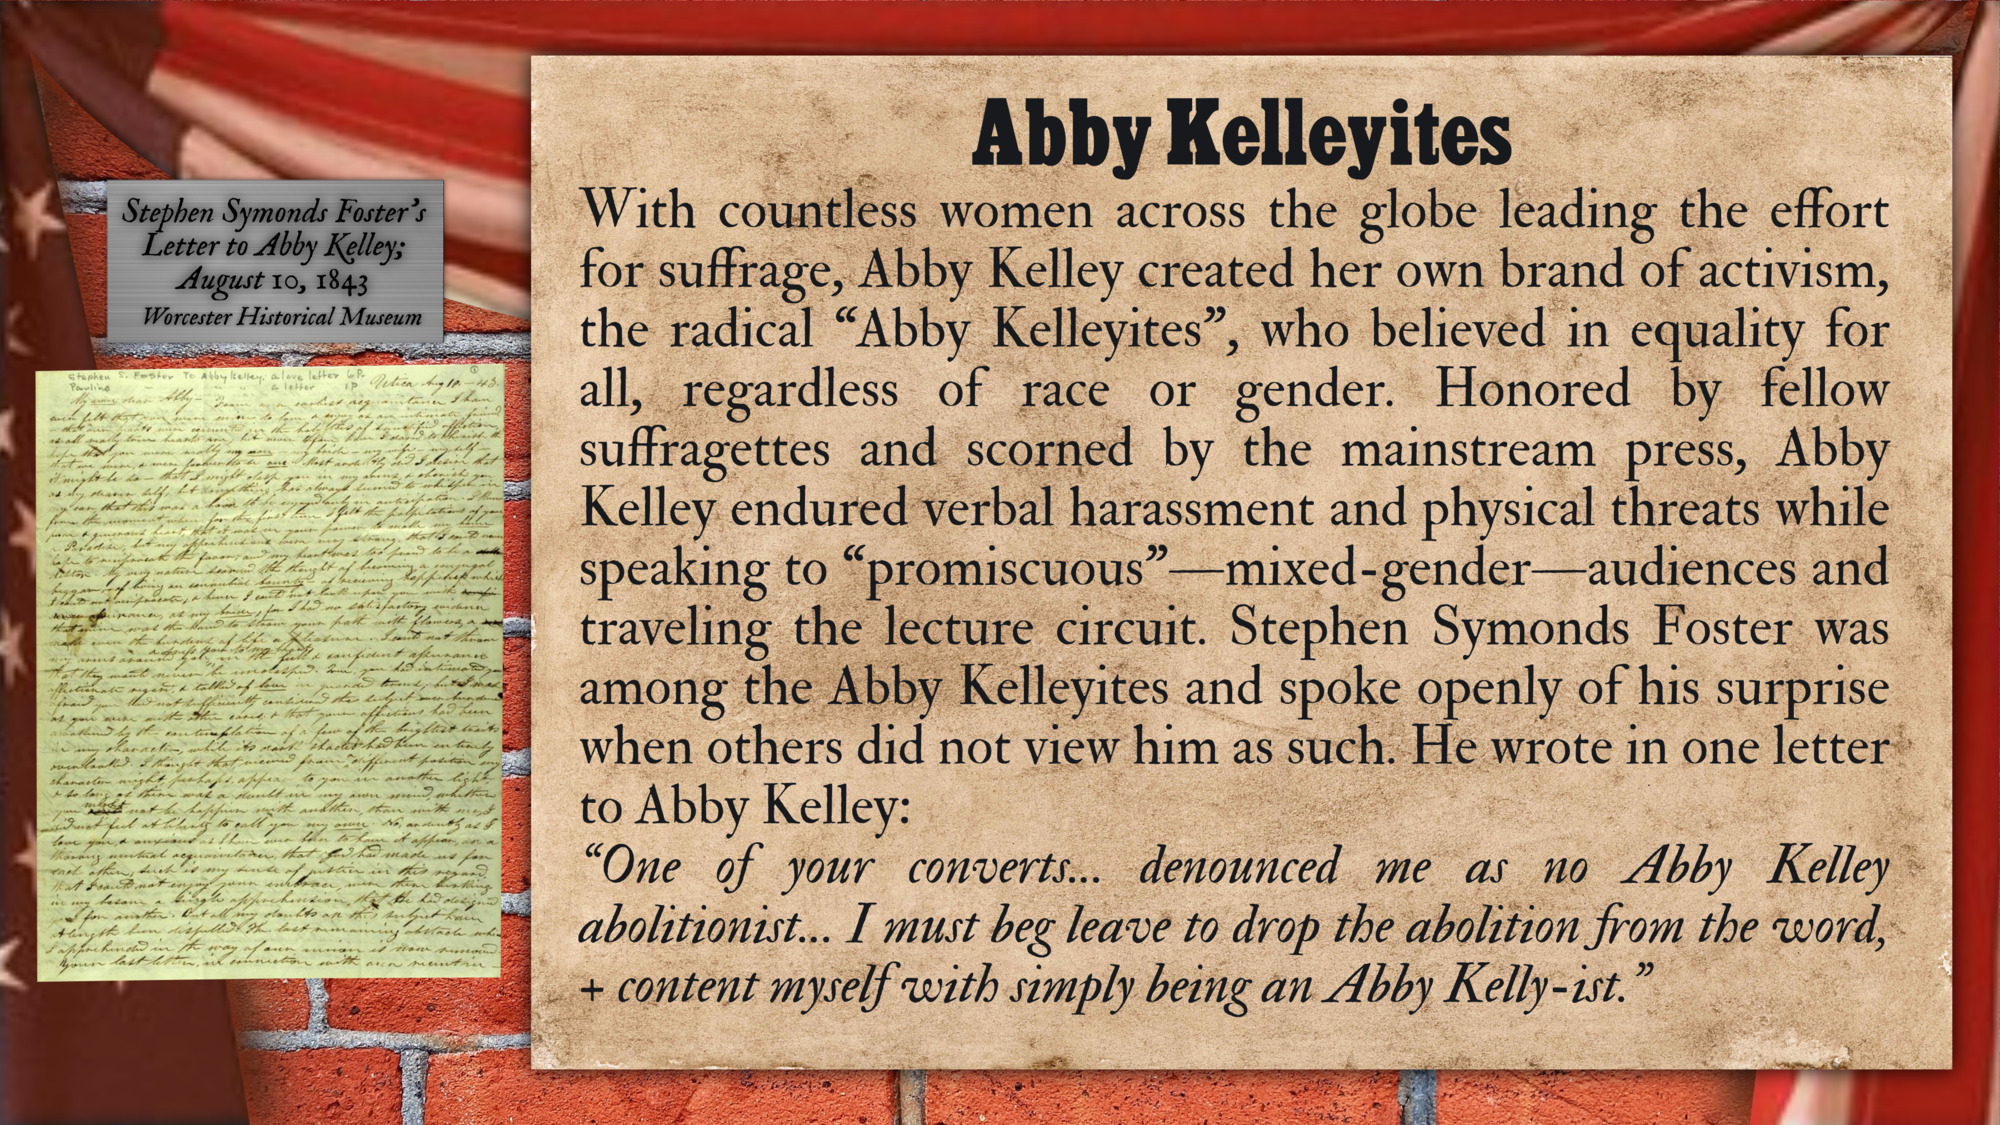 Abby Kelley Foster - Women's Rights National Historical Park (U.S. National  Park Service)